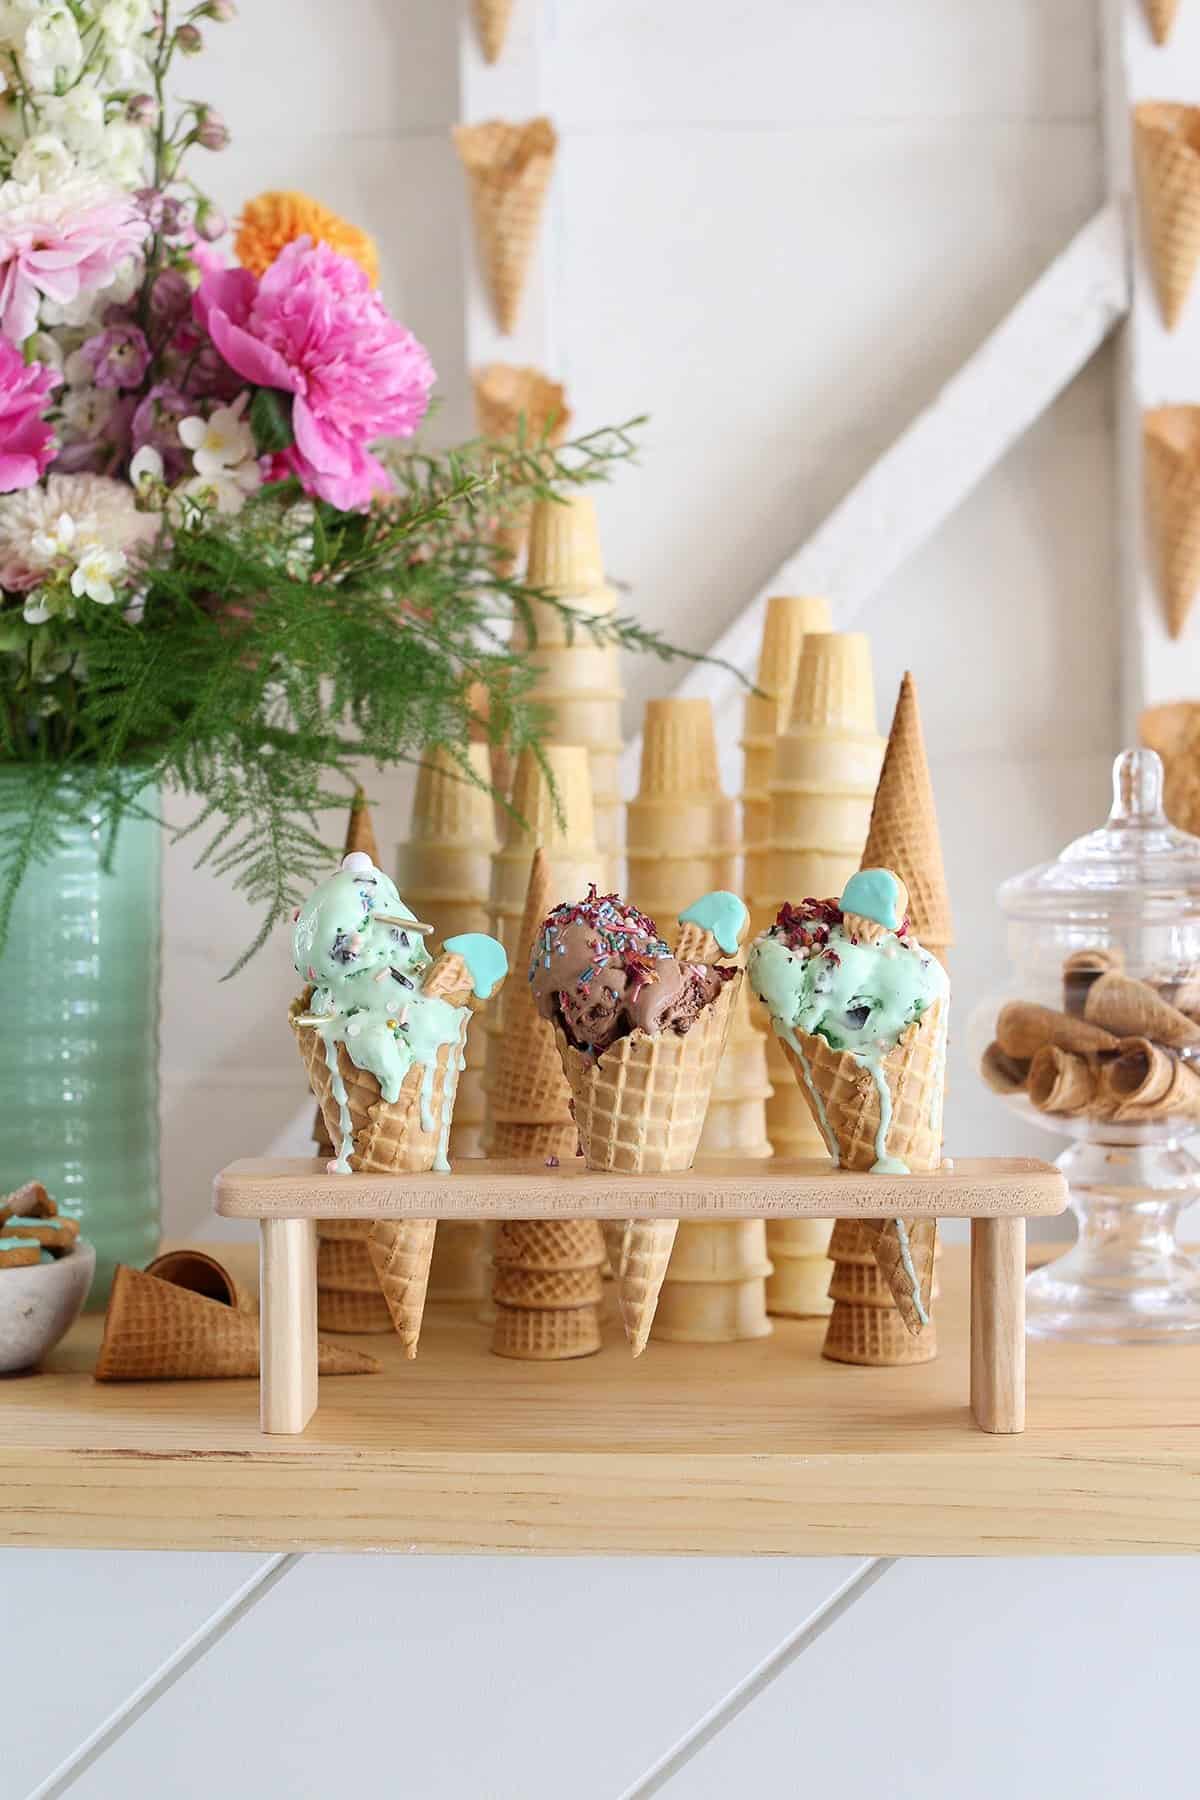 Ice cream bar with ice cream cones and colorful flowers.